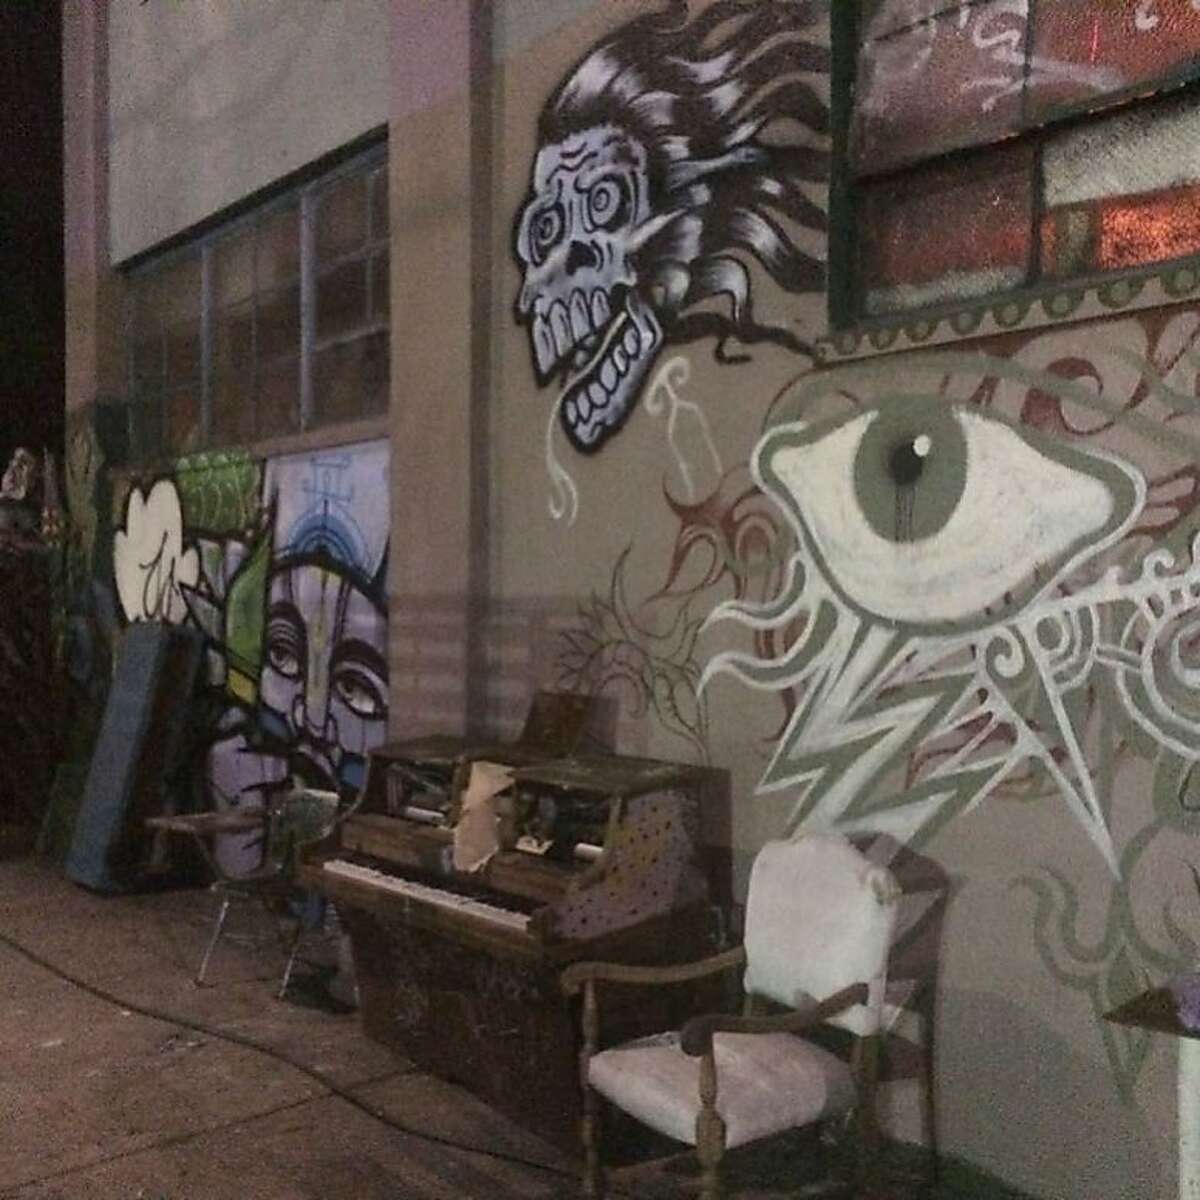 The exterior of the artist collective entitled the Ghost Ship on December 2, 2016, dec. 2016, a few hours before the warehouse caught fire leading to the deaths of 36 people in Oakland, Calif. Photo Aaron Marin